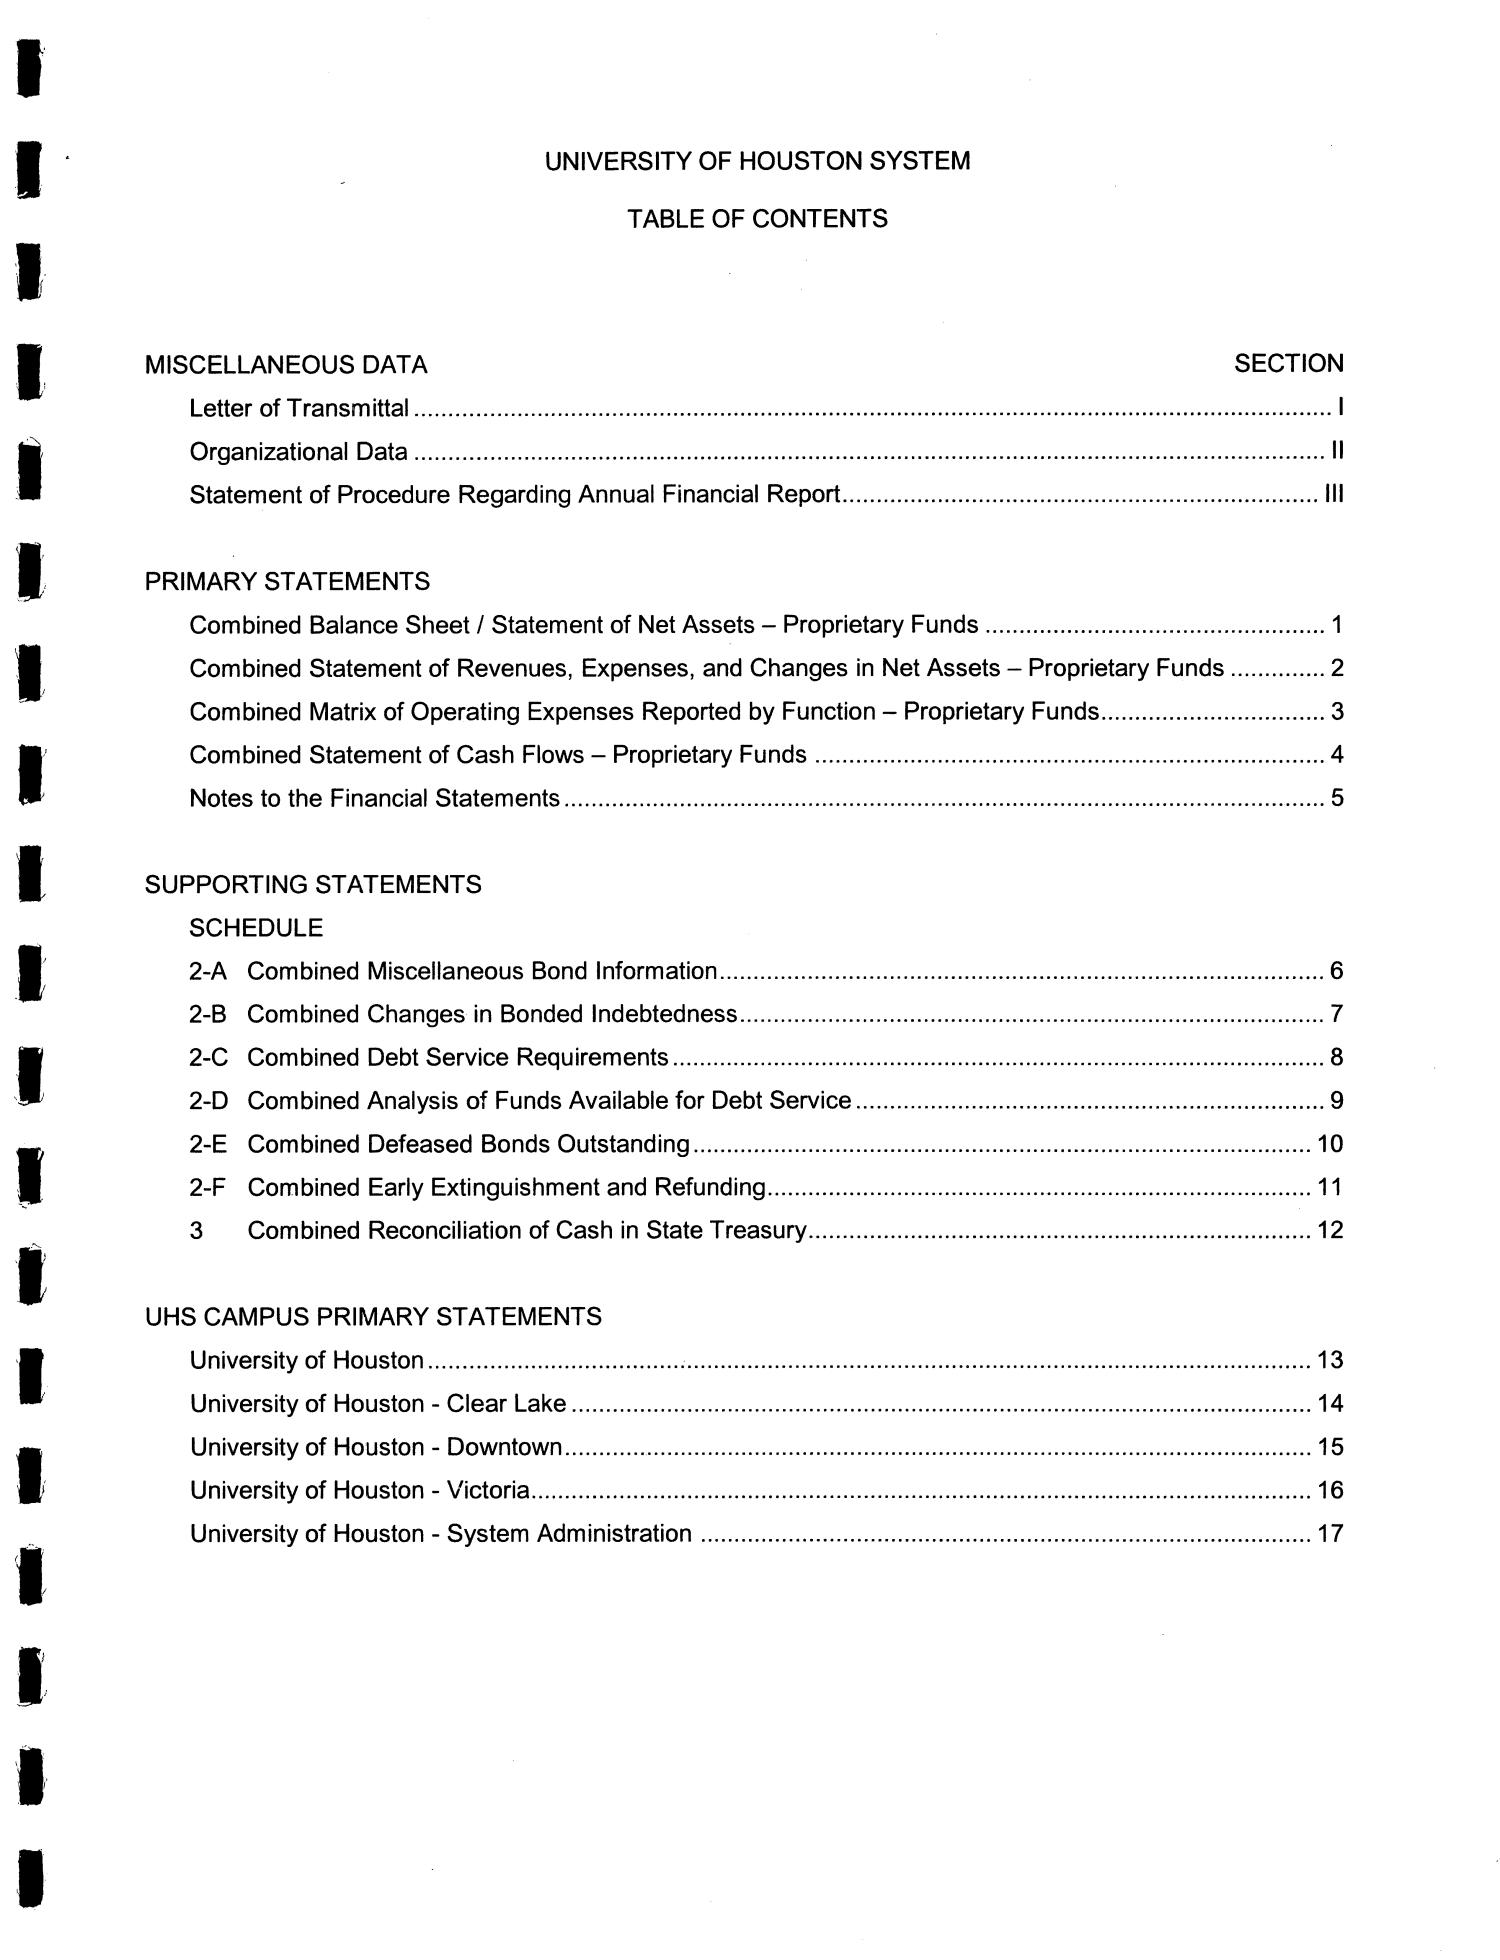 University of Houston System Annual Financial Report: 2014
                                                
                                                    Table Of Contents
                                                